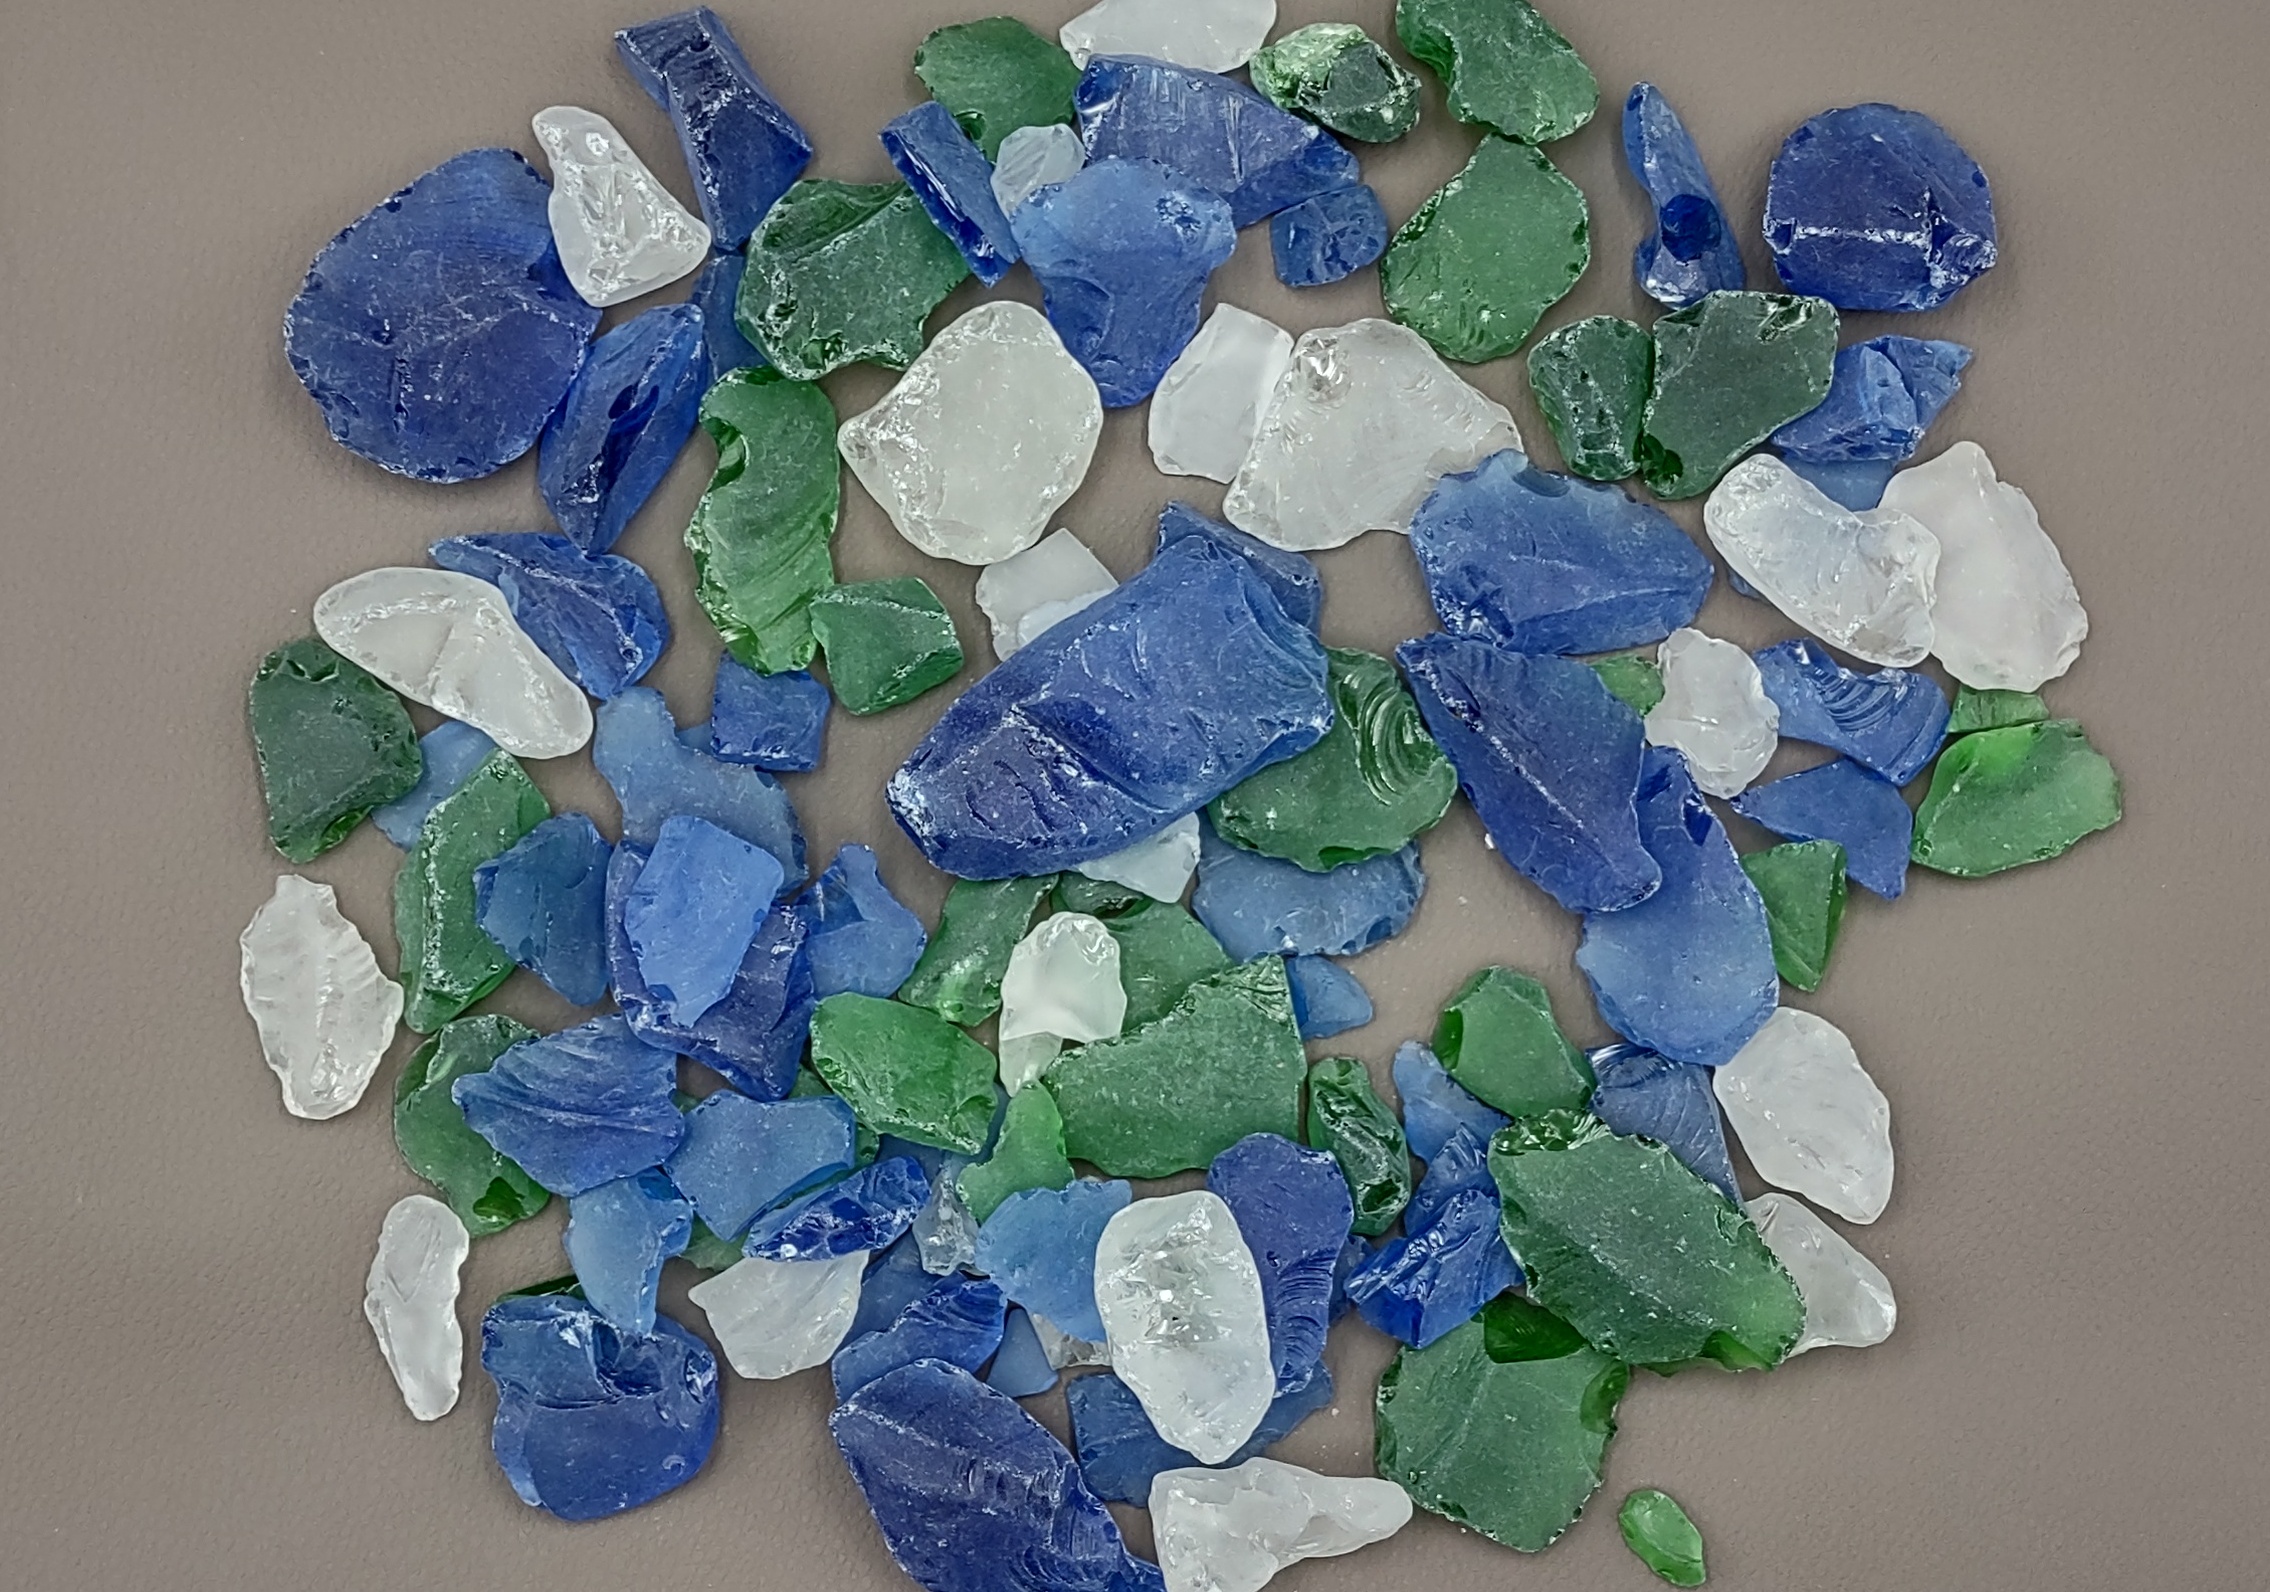 Lot of Loose Patterned Sea Glass Pieces From Scotland Scottish Beach  Seaglass Light Seafoam Green & White RTH 